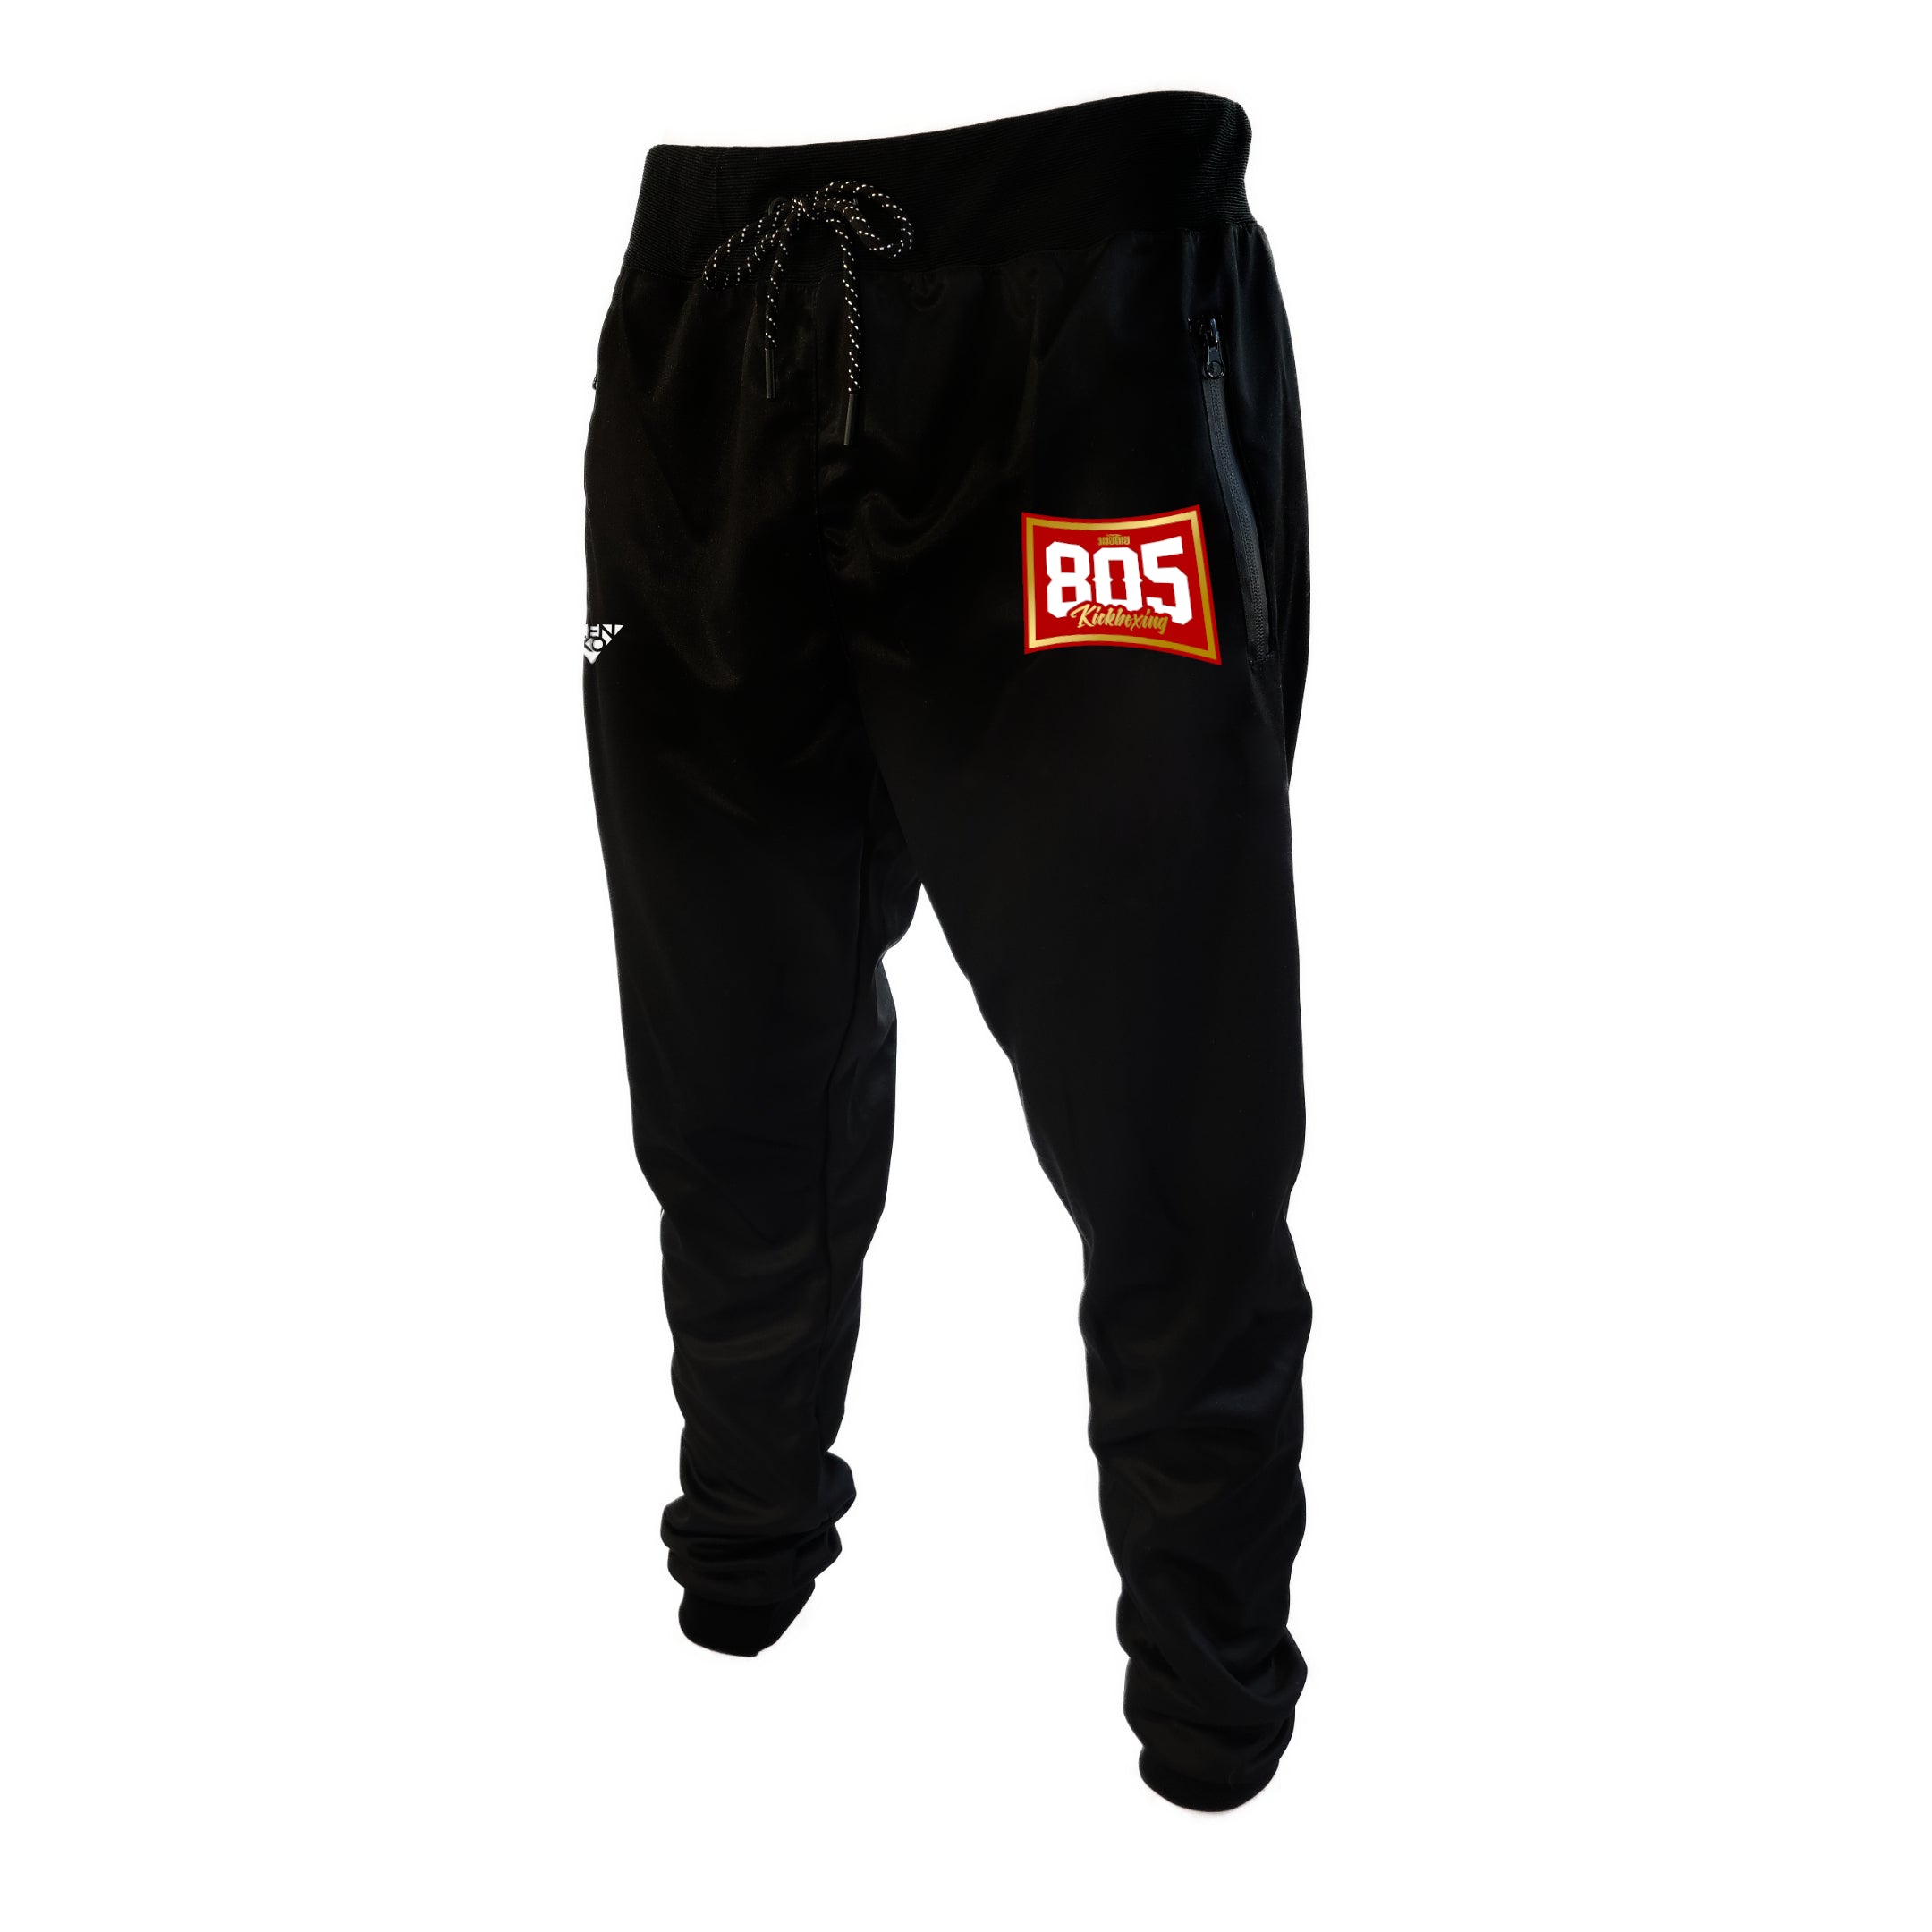 805 Kickboxing Joggers (Red & Gold)